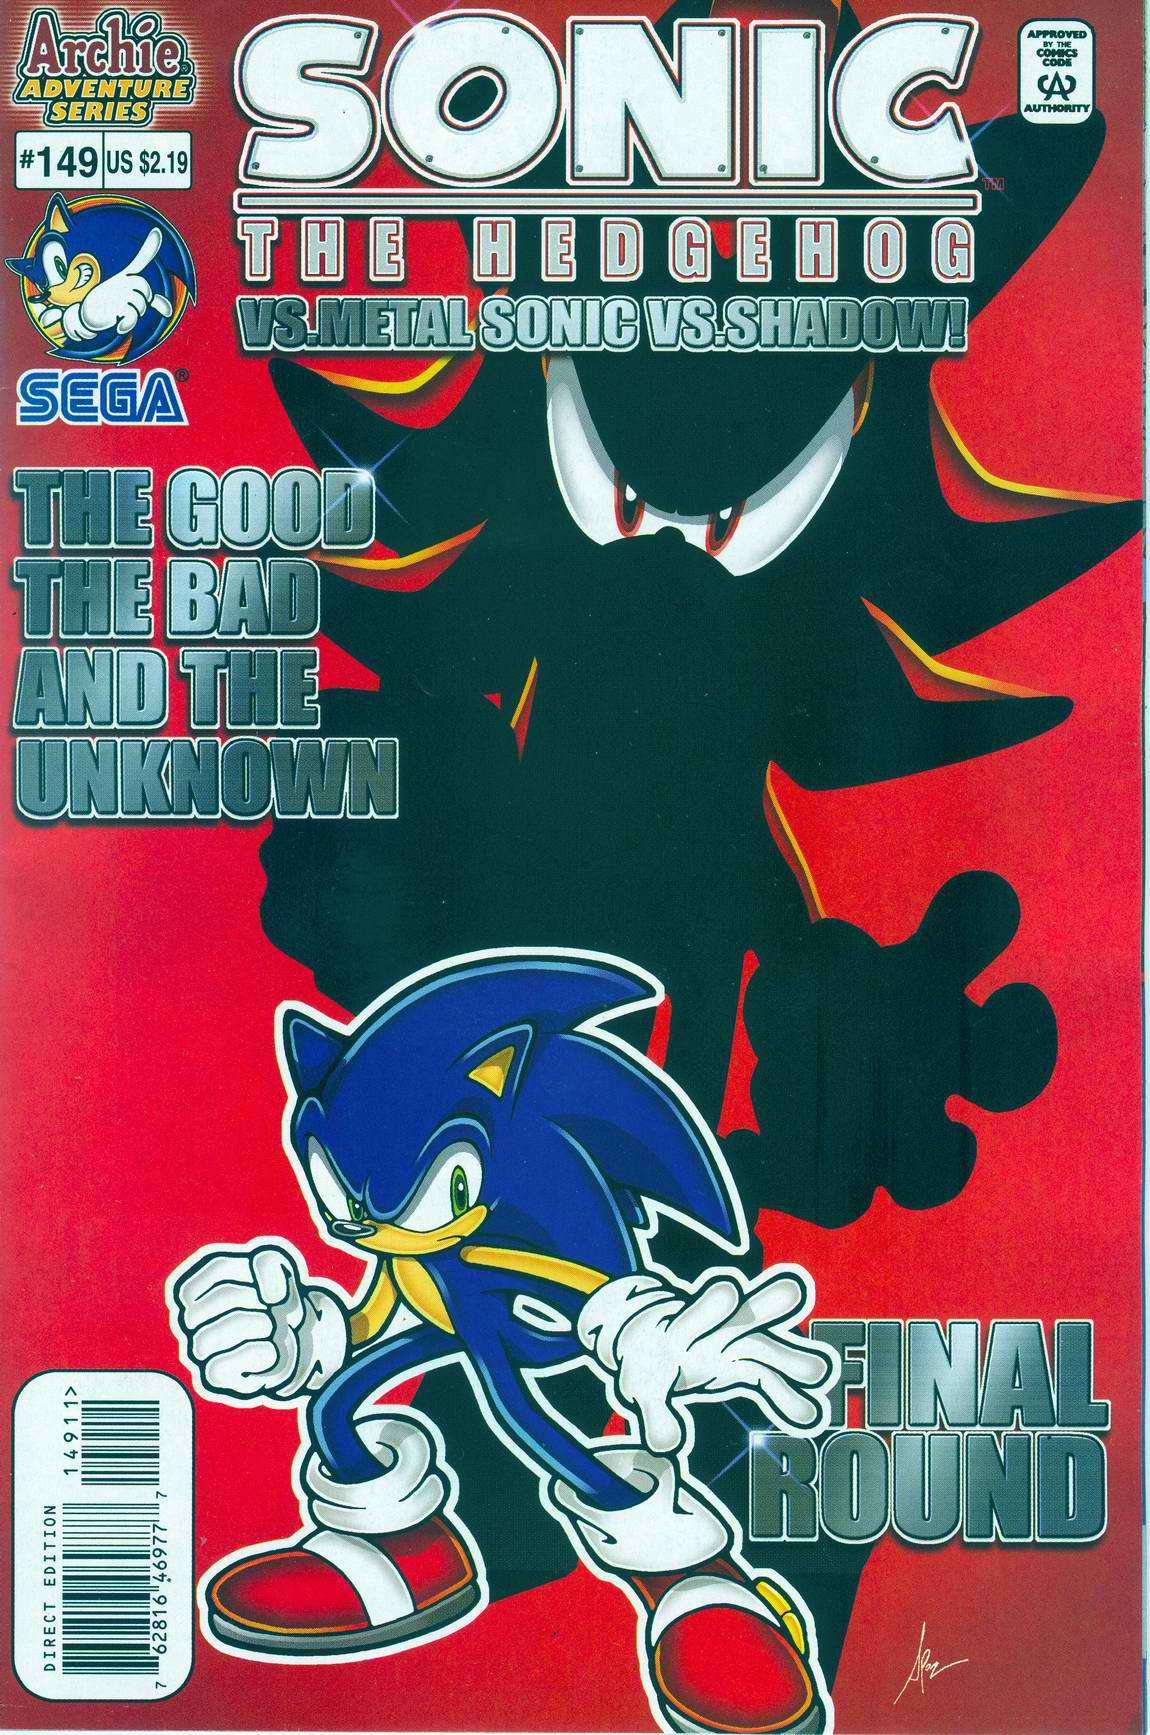 Sonic - Archie Adventure Series July 2005 Comic cover page